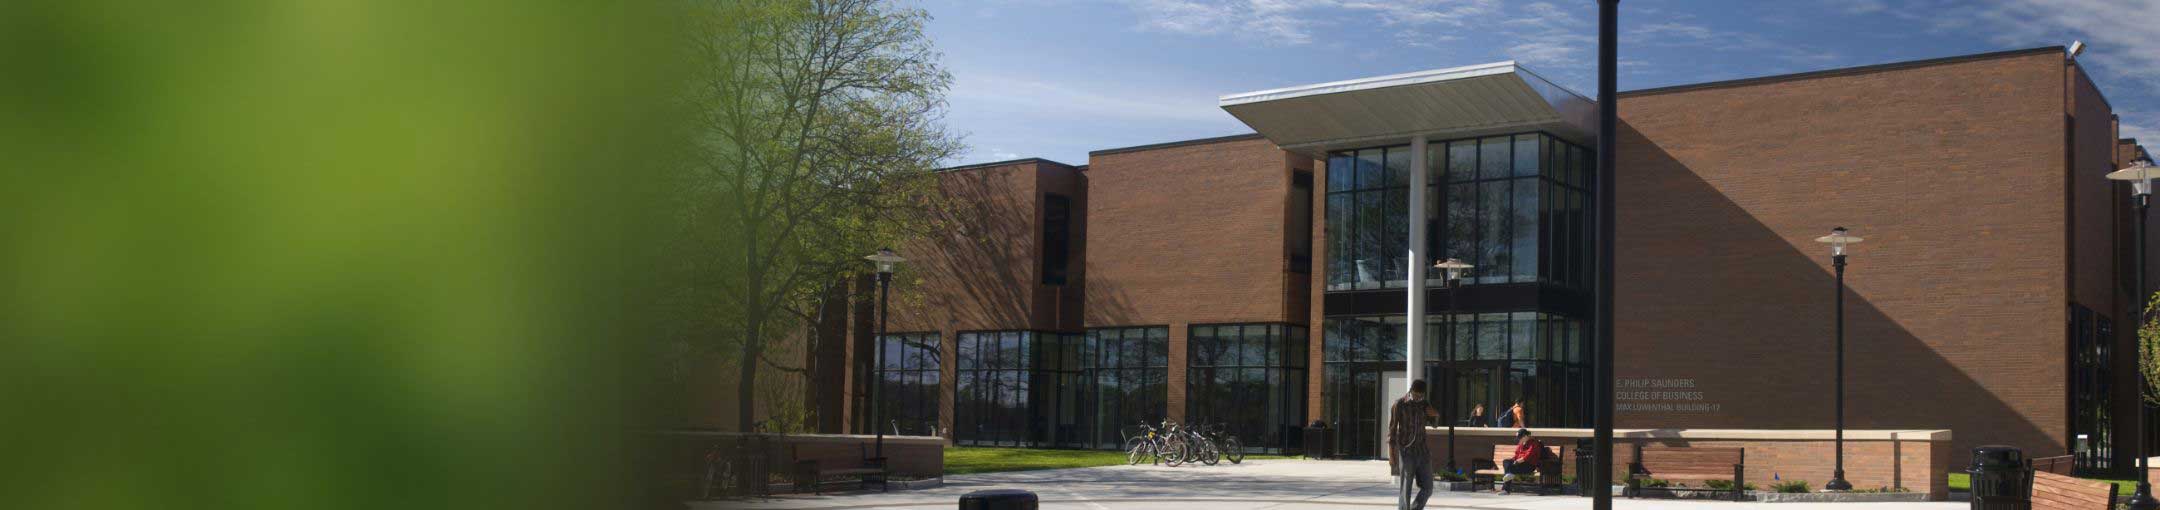 Exterior of Saunders College of Business